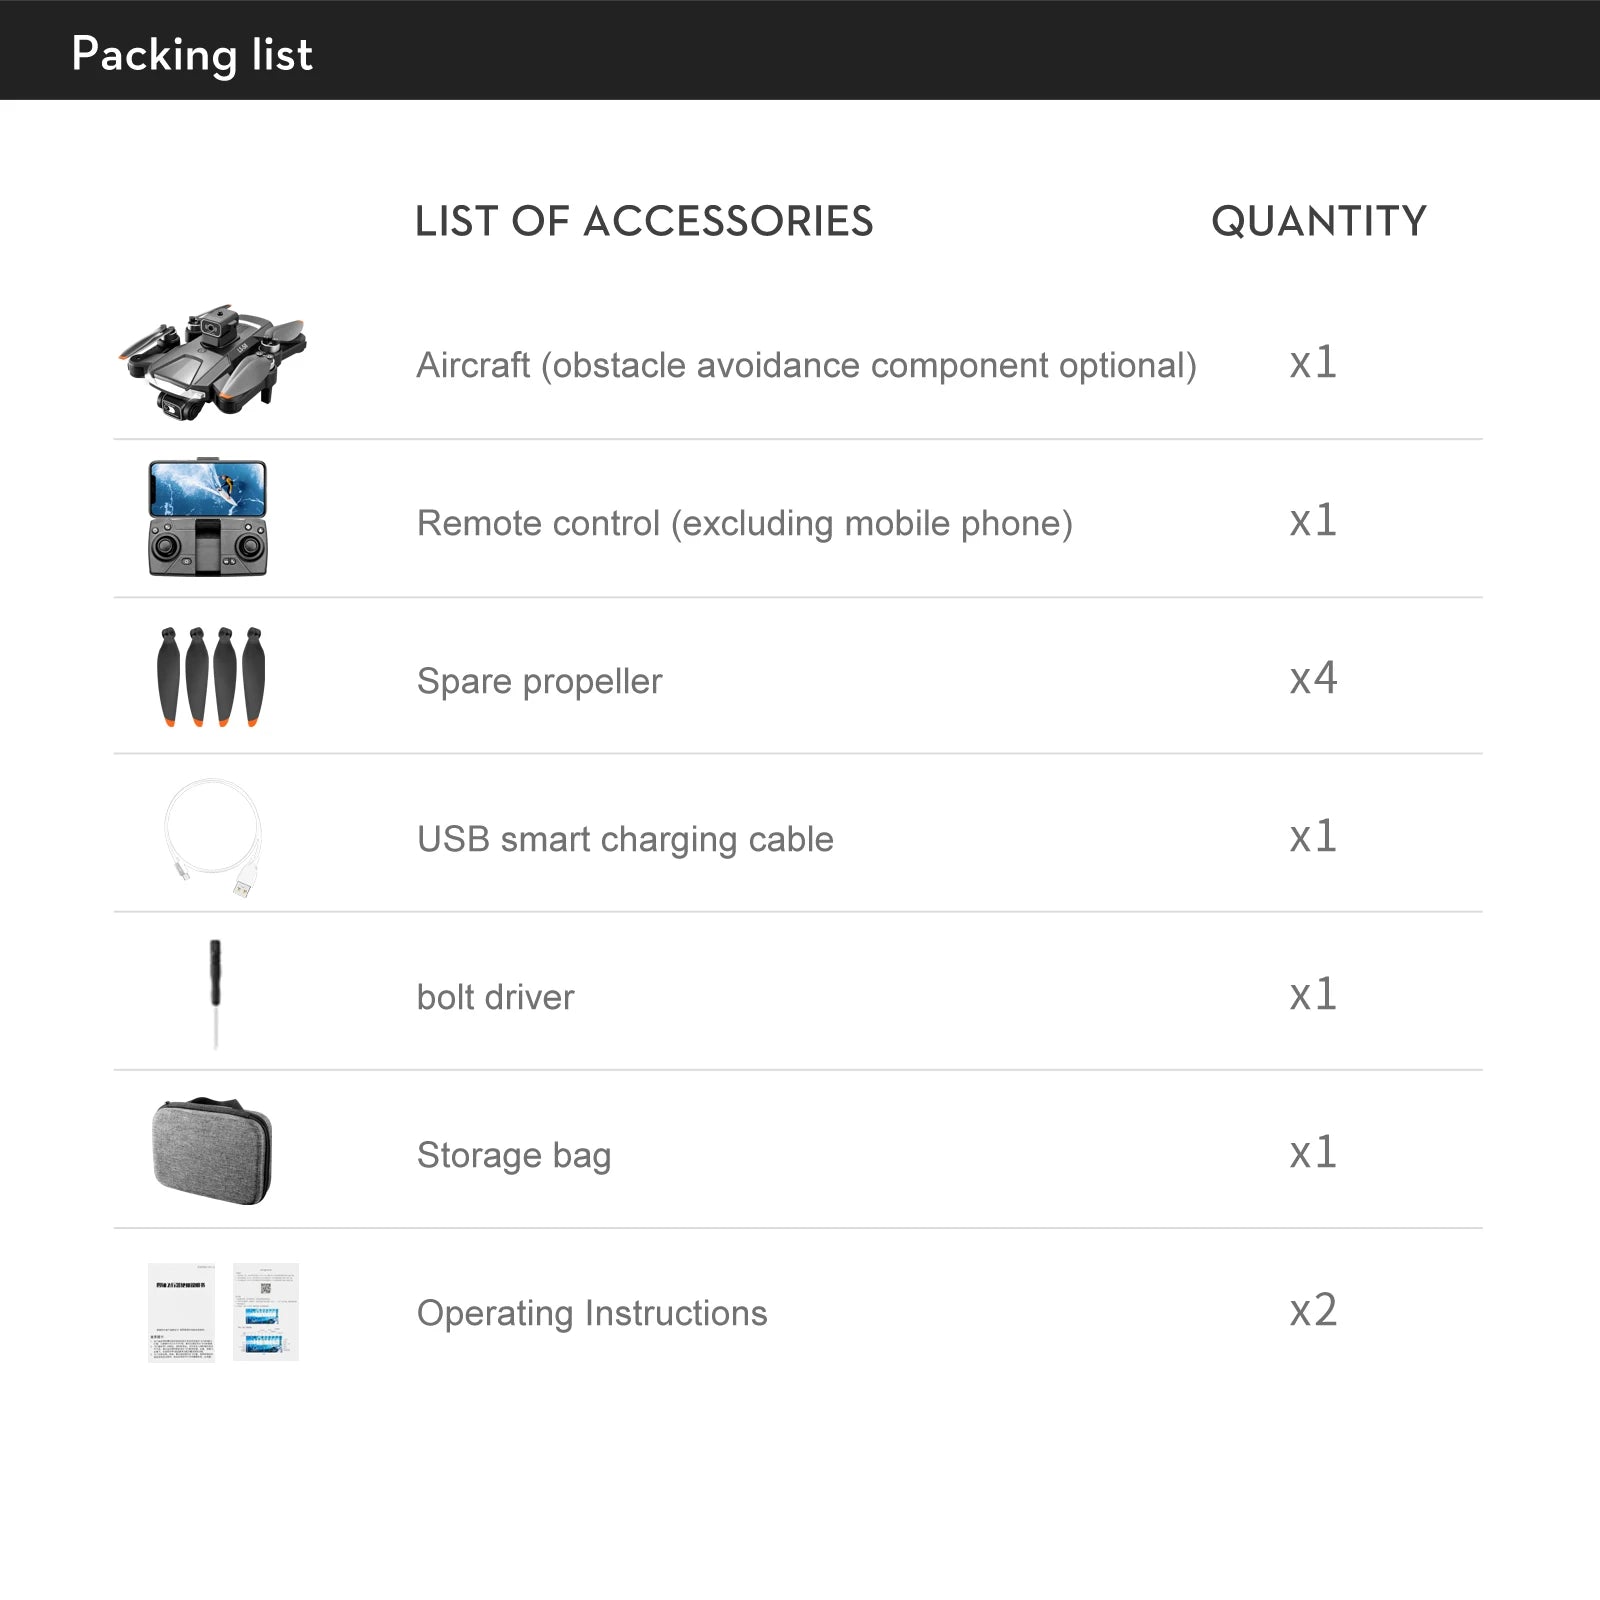 LS58 Drone, packing list list of accessories quantity aircraft (obstacle avoidance component